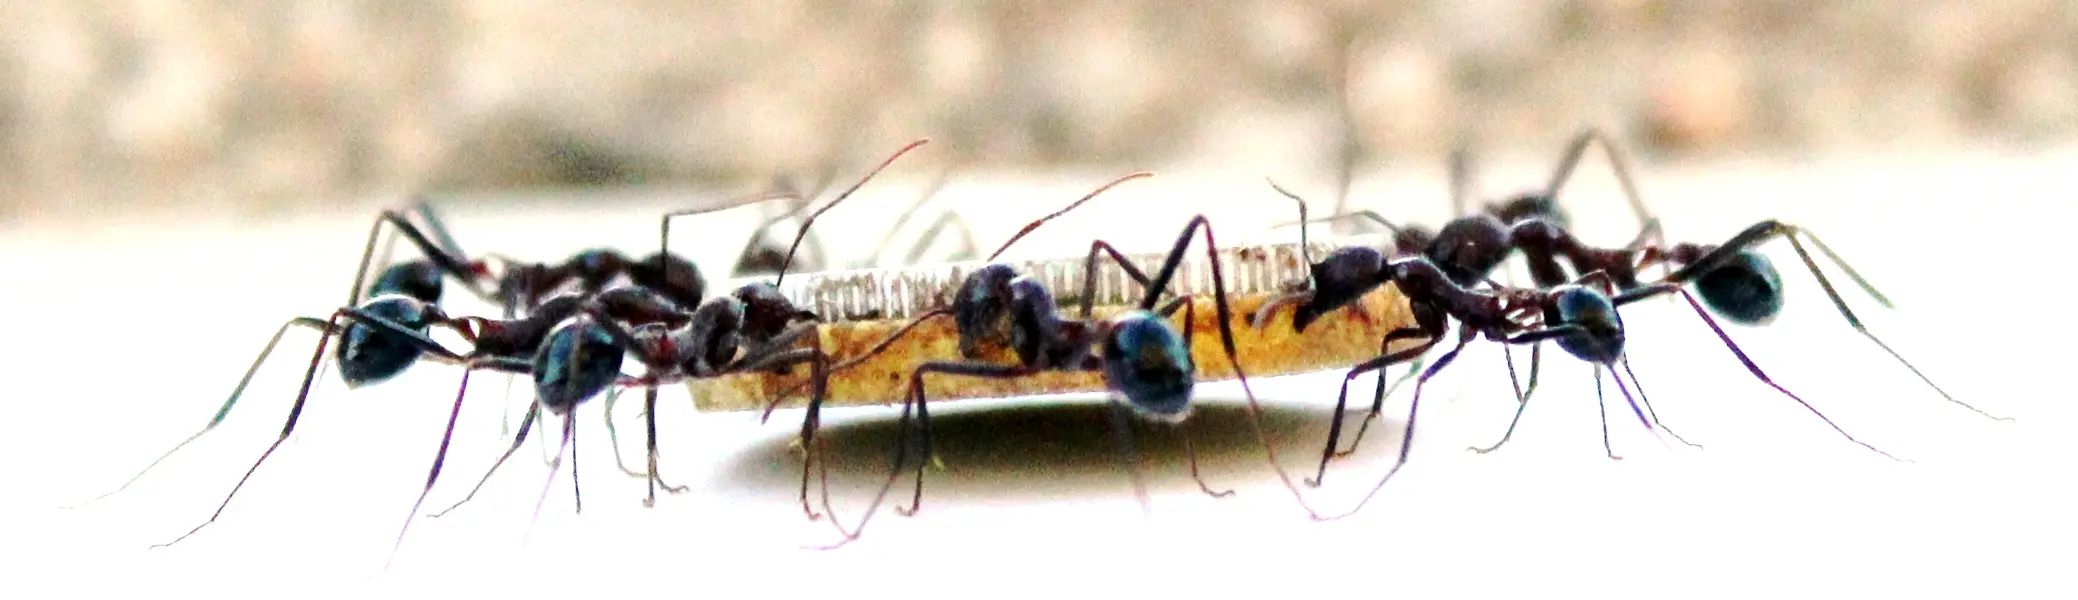 A photo looking from the side at a team of Novomessor cockerelli ants carrying a yellow disc-shaped load. Photo credit to Aurélie Buffin.